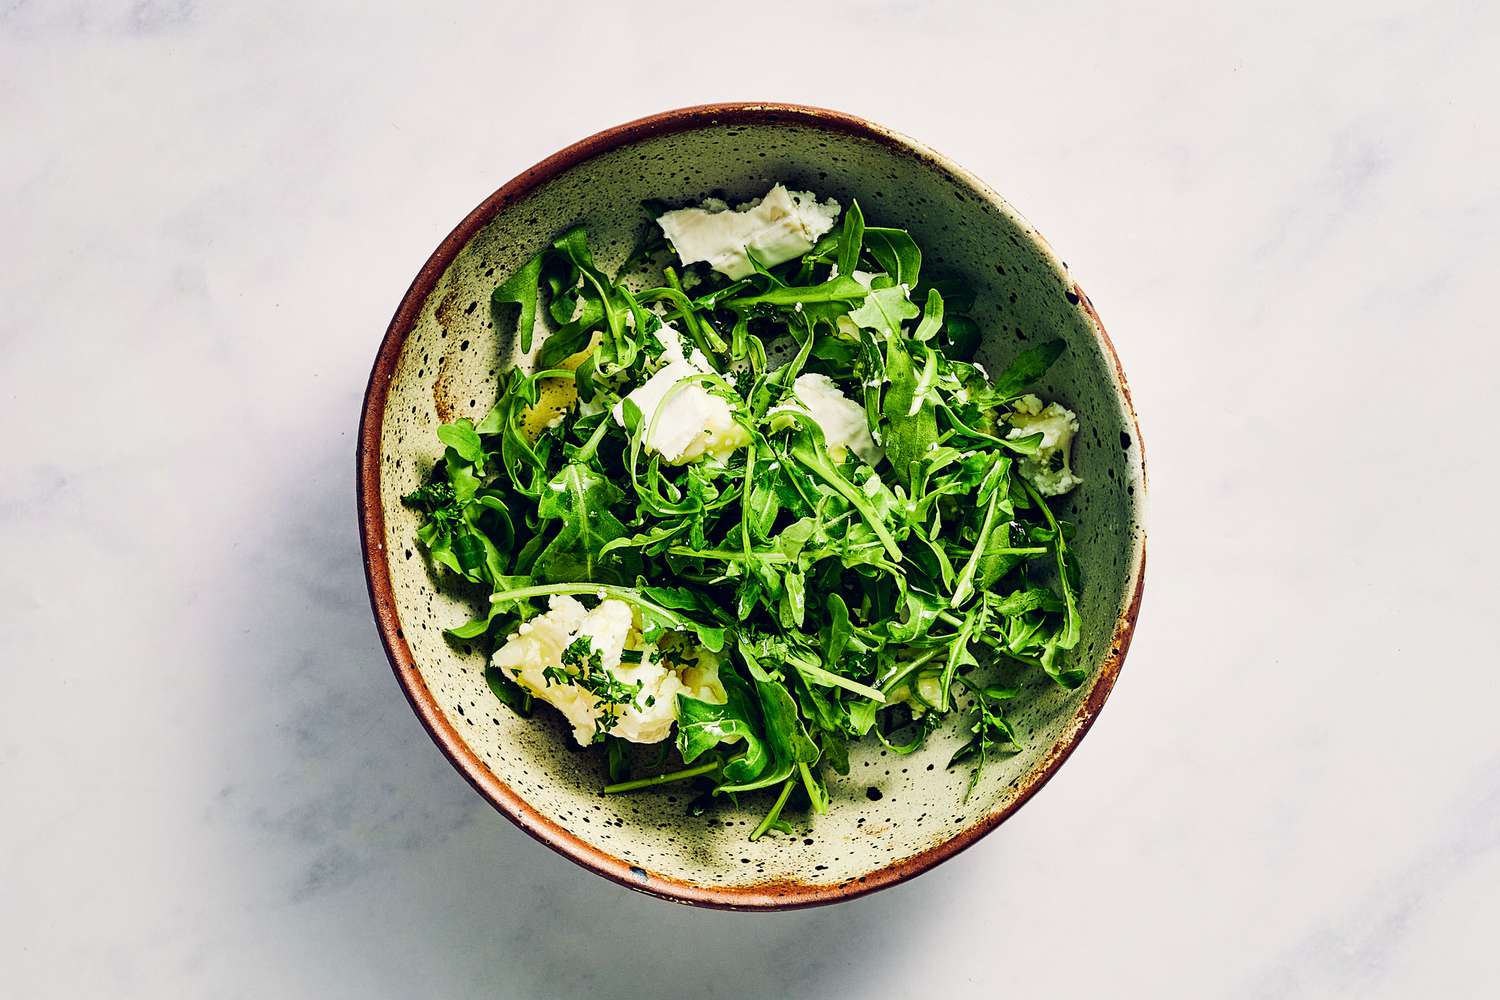 A bowl of arugula, chevre cheese, lemon juice, parsley, and chives